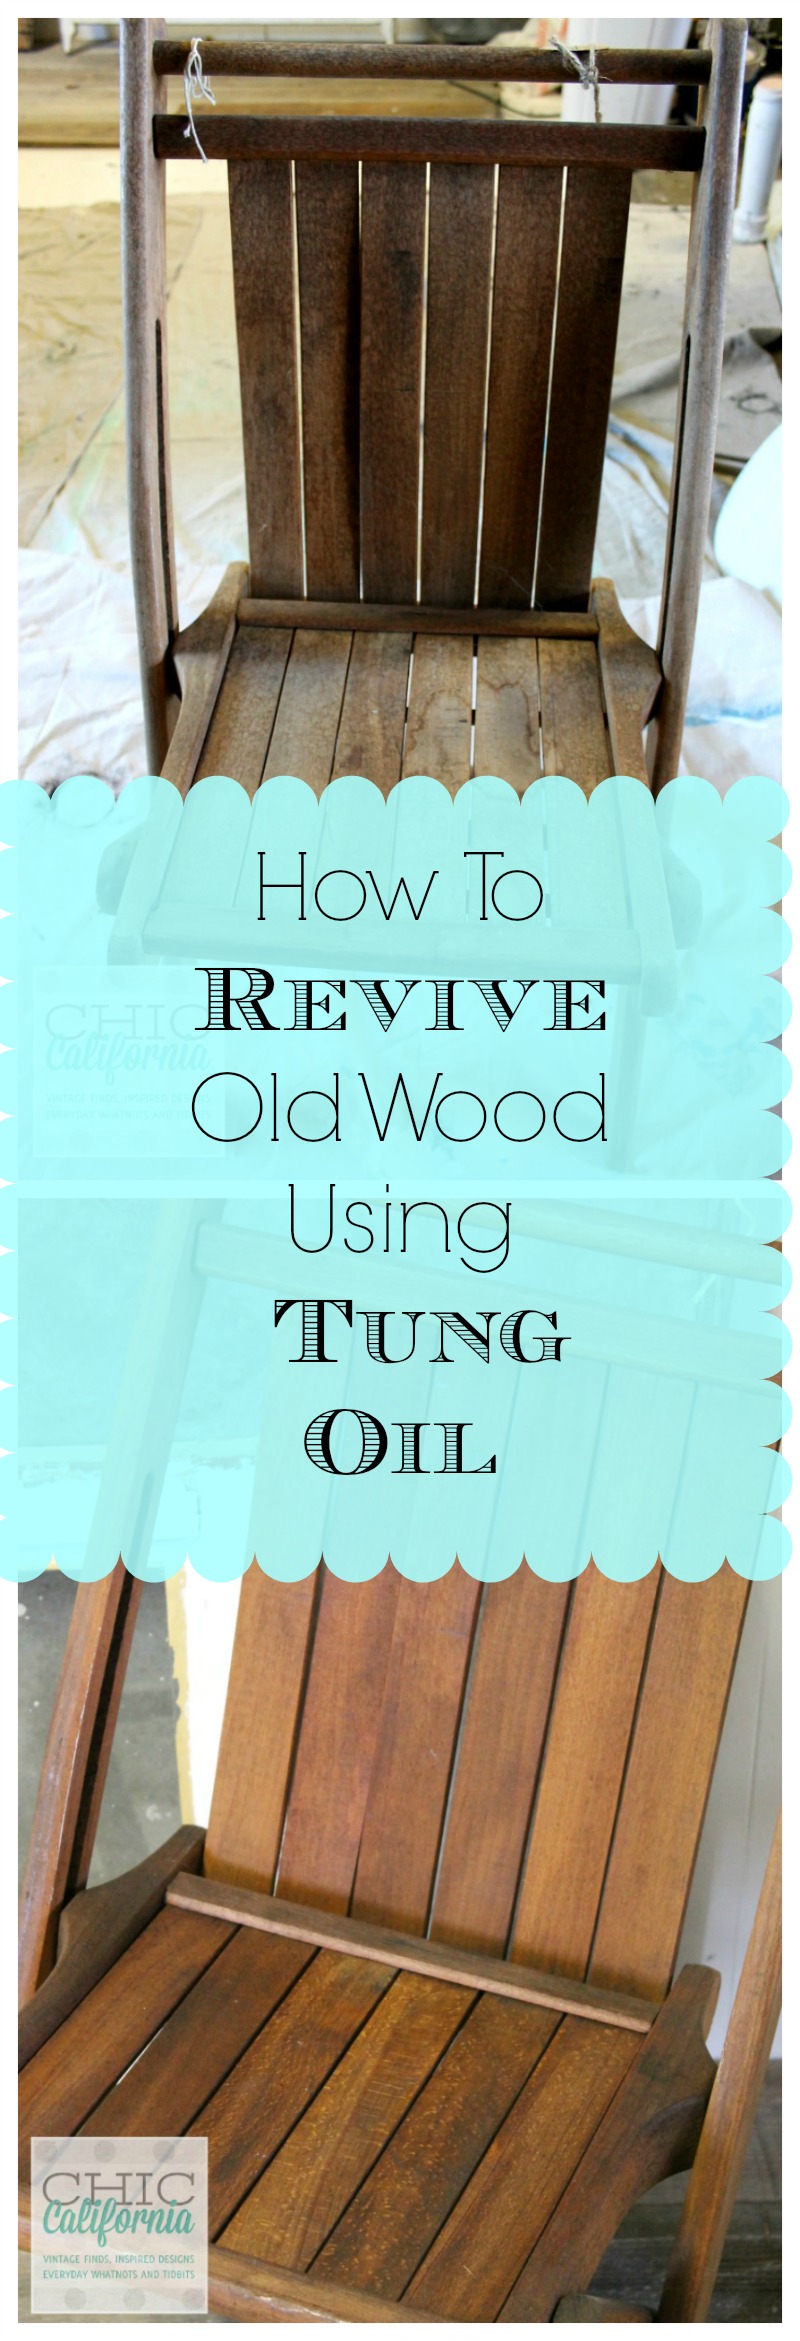 How to Revive Old Wood Using Tung Oil Tutorial by Chic California